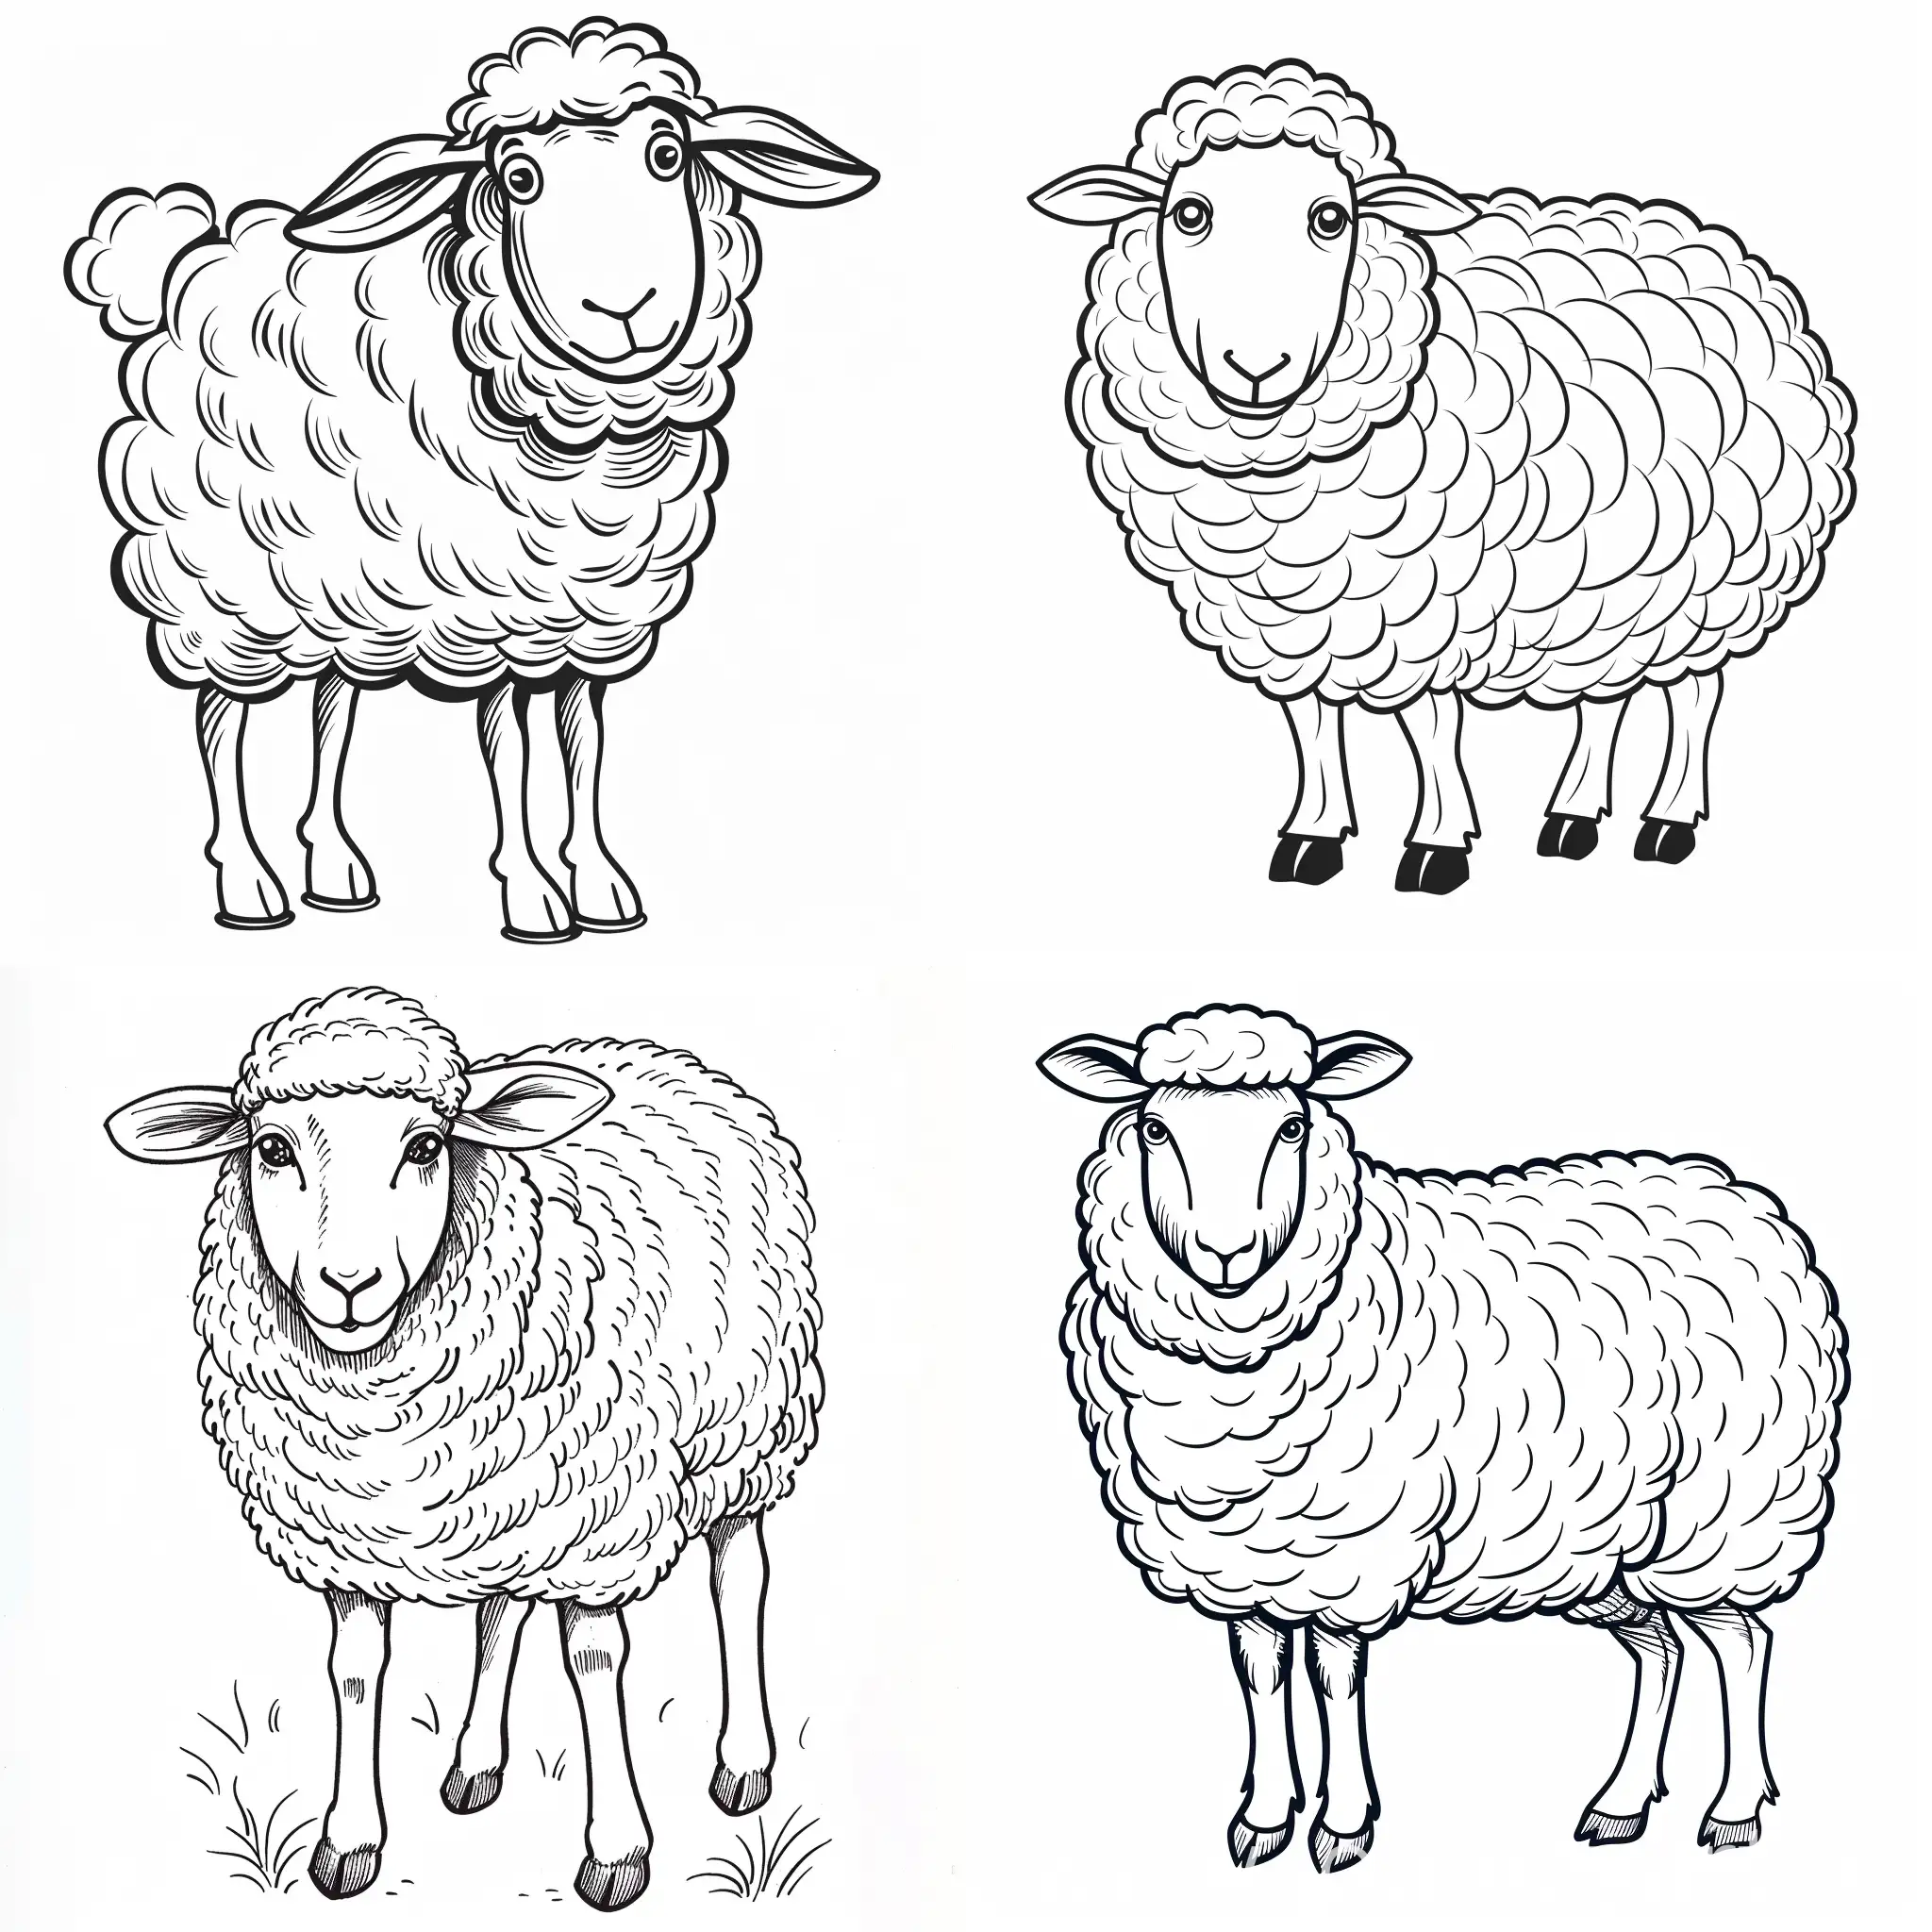 Adorable-Sheep-Coloring-Book-for-Kids-with-Black-Outlines